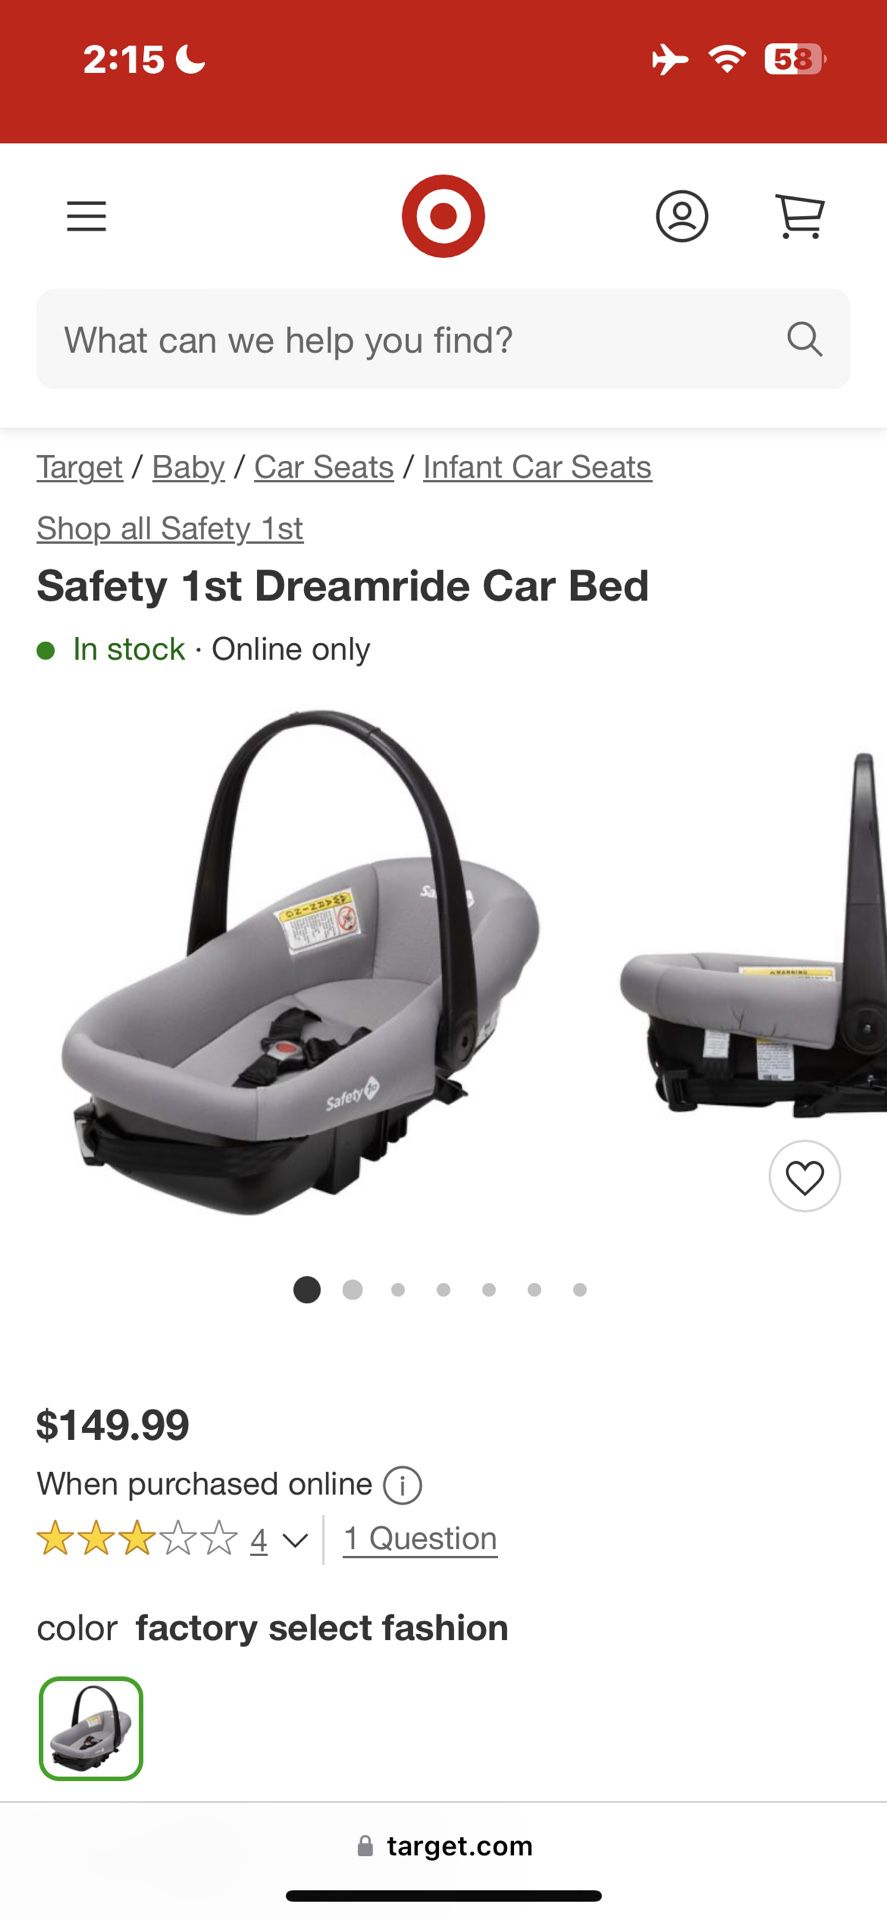 Safety 1st DreamRide Car Seat 